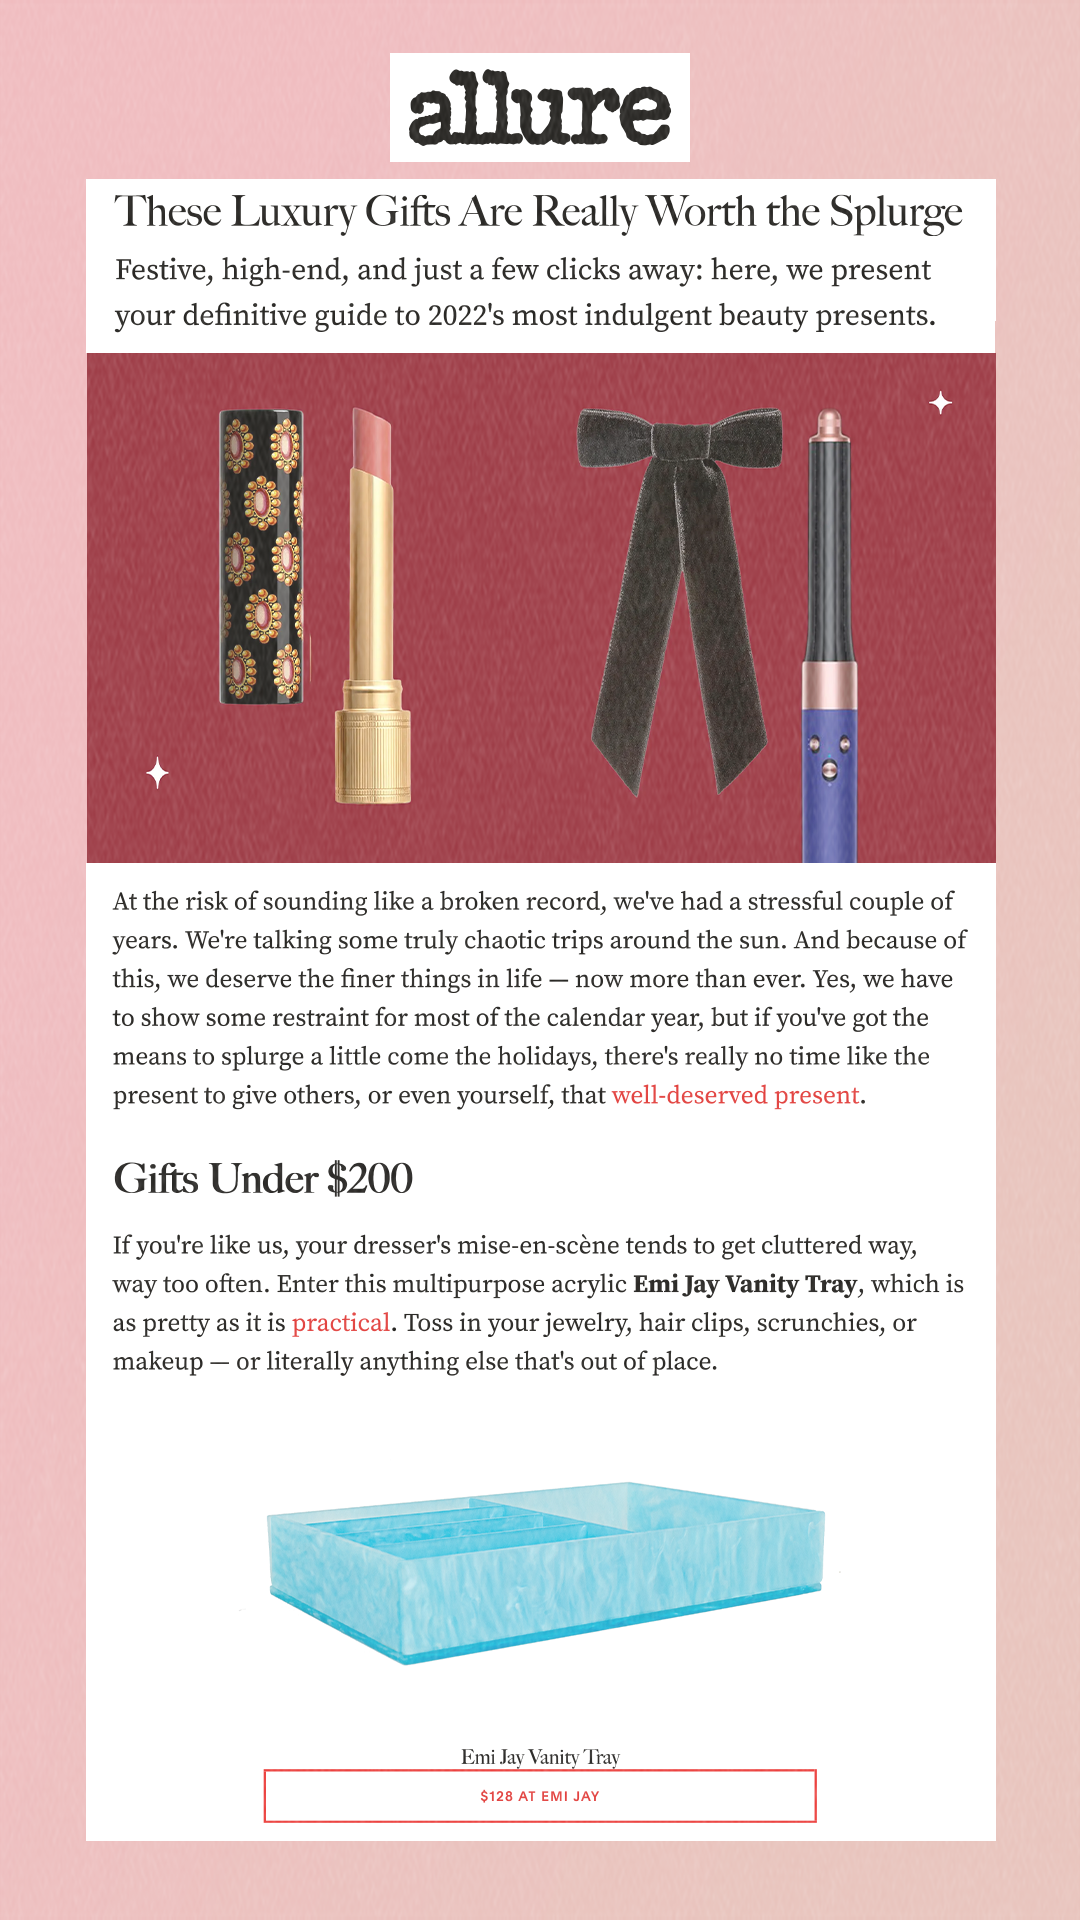 These Luxury Gifts Are Really Worth the Splurge Festive, high-end, and just a few clicks away: here, we present your definitive guide to 2022's most indulgent beauty presents. At the risk of sounding like a broken record, we've had a stressful couple of years. We're talking some truly chaotic trips around the sun. And because of this, we deserve the finer things in life — now more than ever. Yes, we have to show some restraint for most of the calendar year, but if you've got the means to splurge a little come the holidays, there's really no time like the present to give others, or even yourself, that well-deserved present. $128 at Emi Jay If you're like us, your dresser's mise-en-scène tends to get cluttered way, way too often. Enter this multipurpose acrylic Emi Jay Vanity Tray, which is as pretty as it is practical. Toss in your jewelry, hair clips, scrunchies, or makeup — or literally anything else that's out of place.